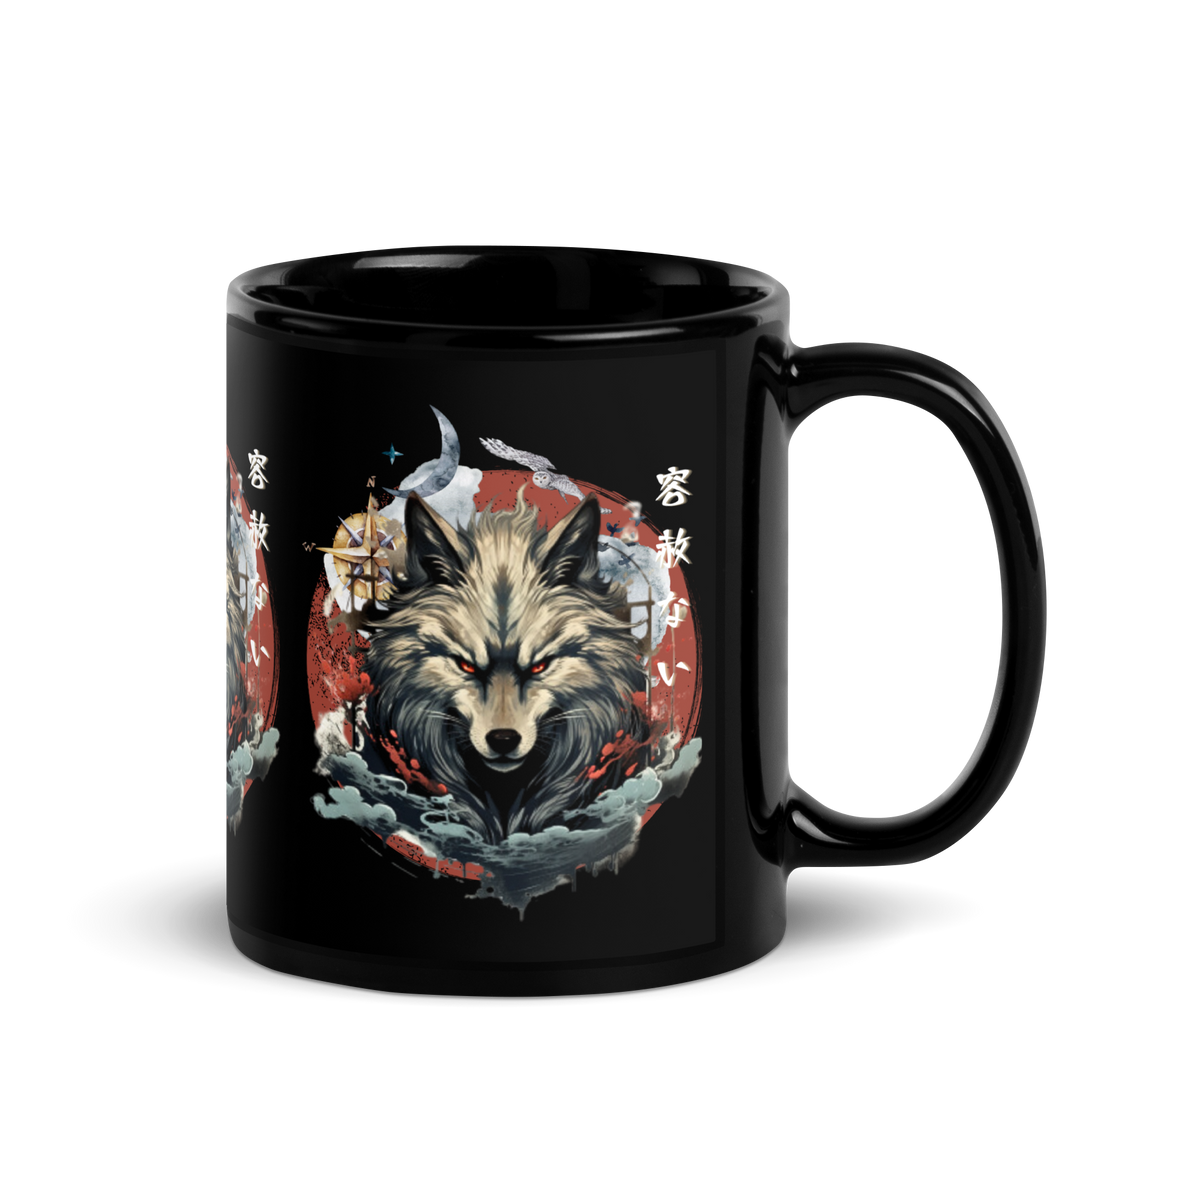 Japanese wolf, Black glossy mug, Wolf print, Coffee mug, Tea cup, Artistic design, Cultural motif, Unique gift, Mug collection, Japanese folklore, Drinkware, Home decor, Kitchen accessories, Animal art, Traditional symbolism, Modern aesthetics, High-quality print, Collectible item, Office essentials, Trendy merchandise, Online store, Puerto Rico entrepreneur